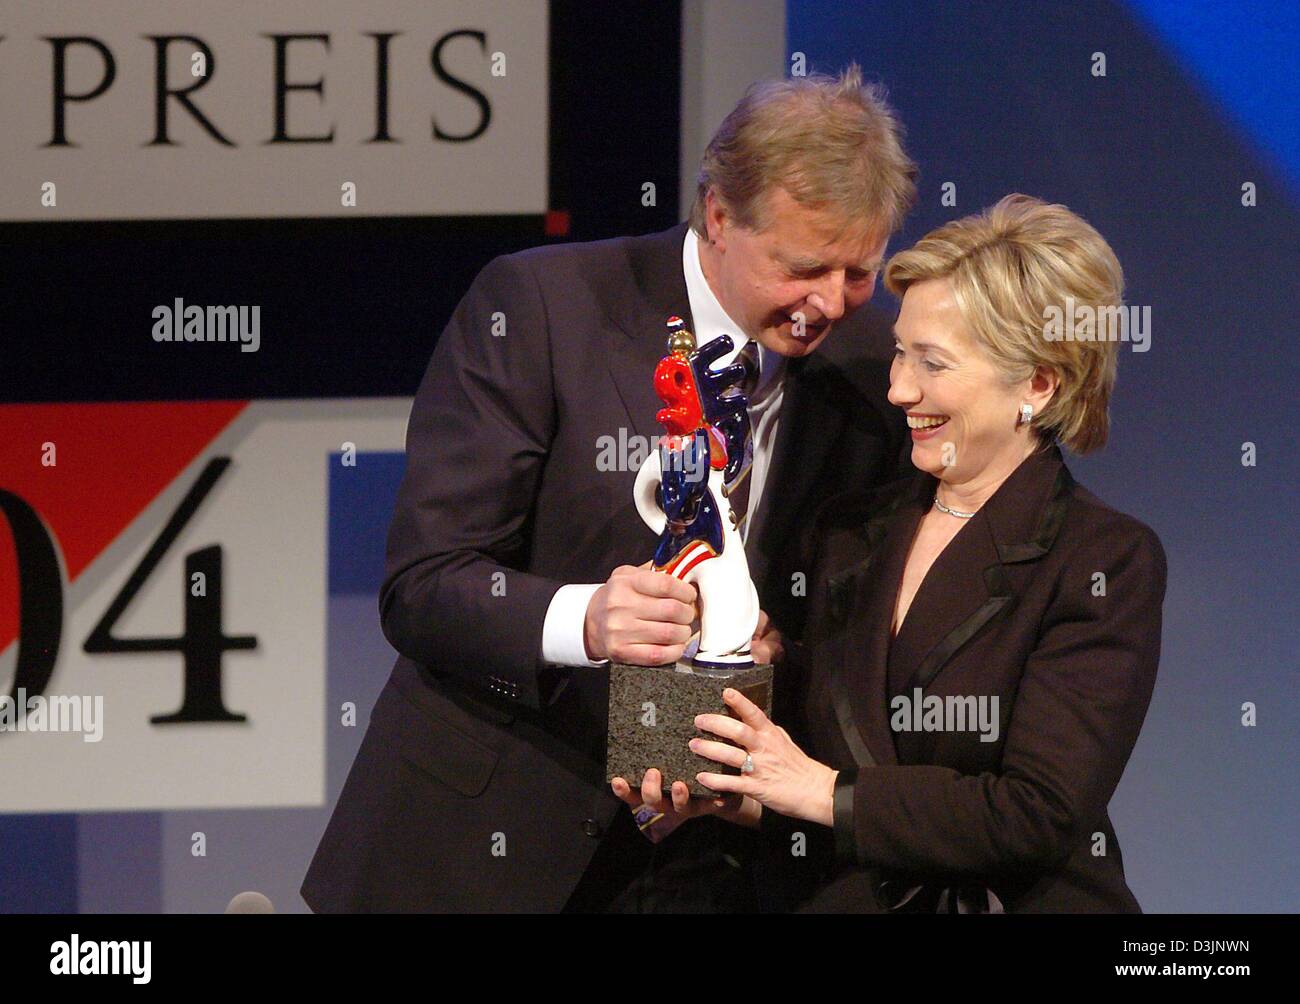 (dpa) - US Senator Hillary Clinton (R) smiles as she receives the German Media Prize 2004 from Karlheinz Koegel, Head of Media Control and founder of of the Media Prize, in Baden-Baden, Germany, 13 February 2005. Clinton was awarded the prize for her exemplary engagement advancing the role of women in the world of politics, society and media. Stock Photo